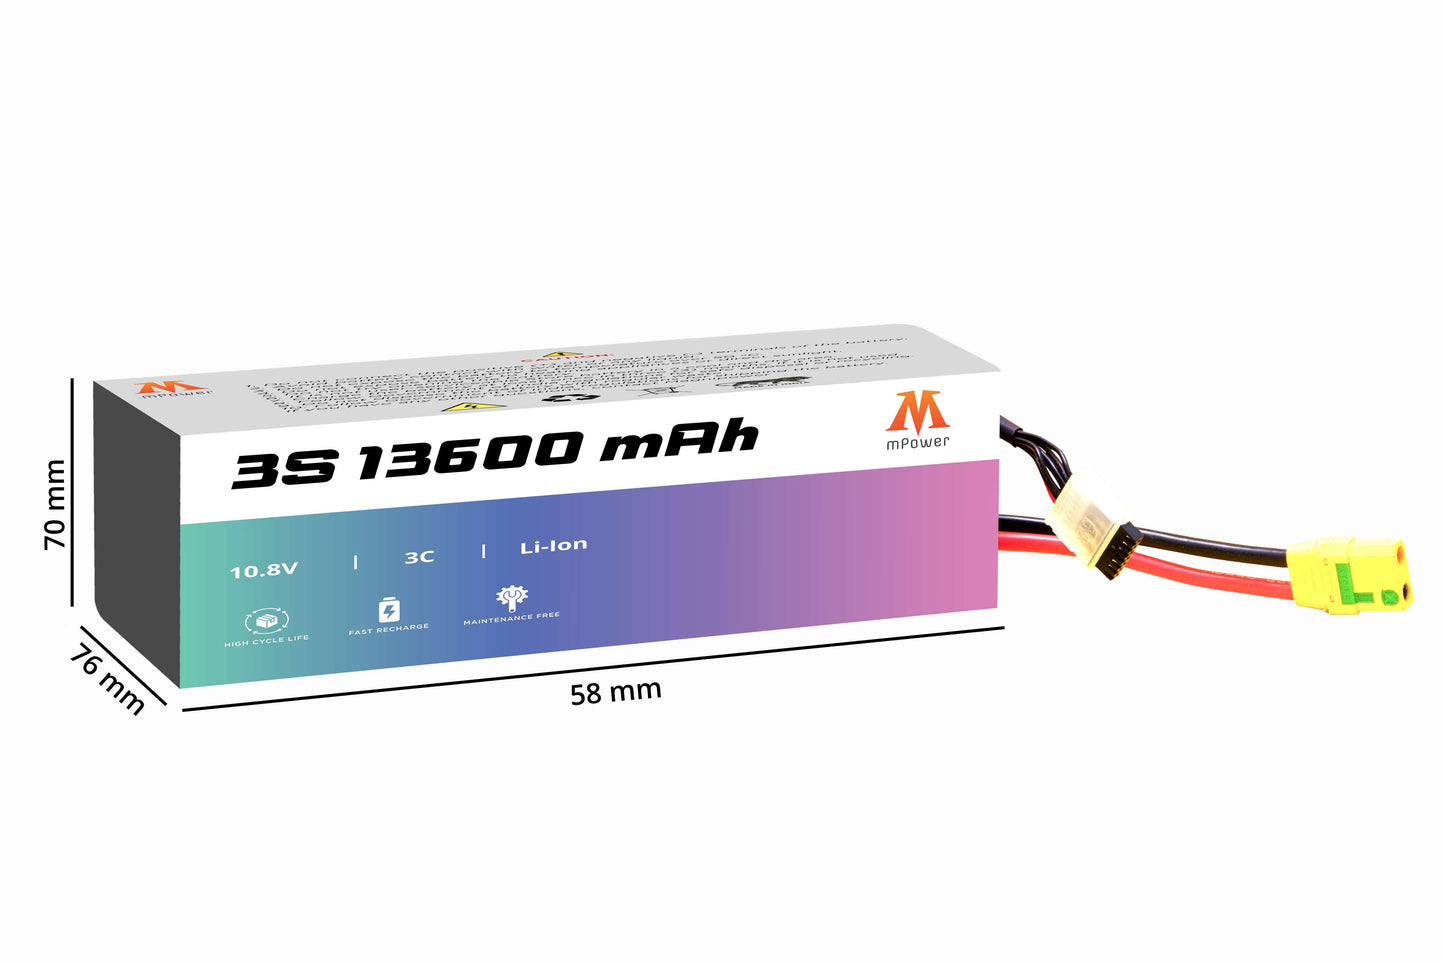 mPower 3S 13600mAh Lithium-Ion Battery for Survey Drones